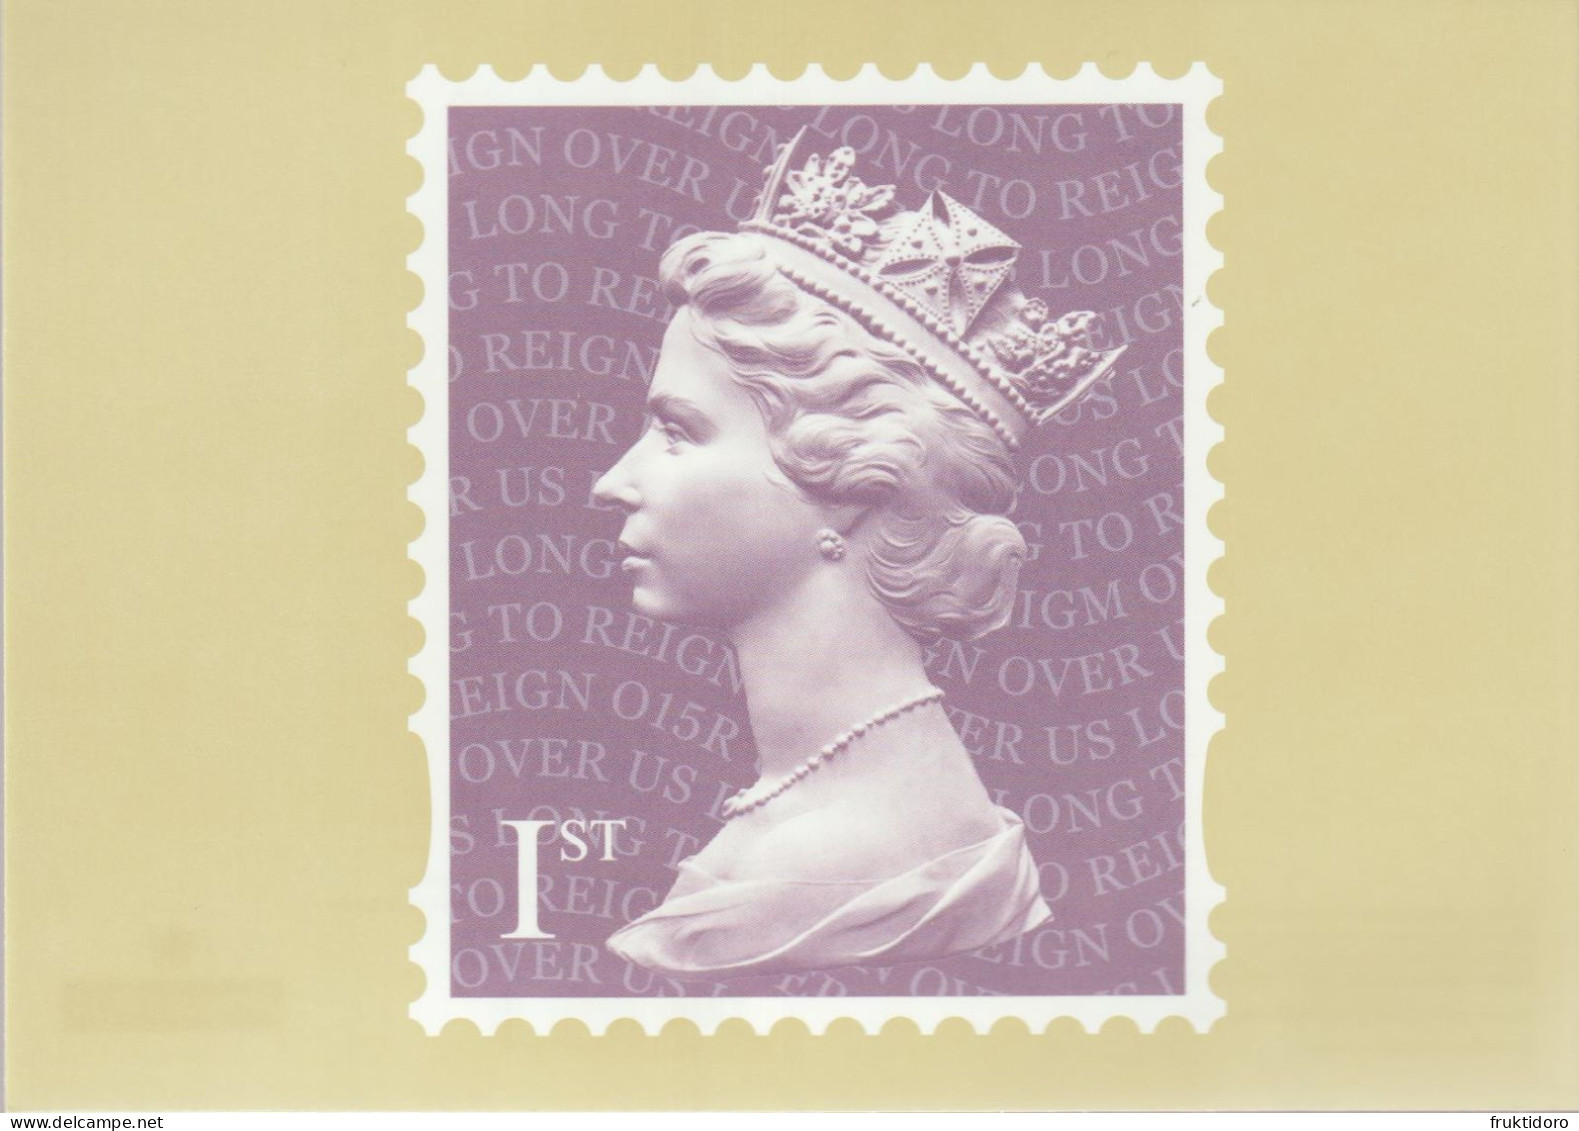 United Kingdom Postcards 2015 About Stamps In Mi Block 96 Queen Elizabeth II - Long To Reign Over Us ** - Collezioni